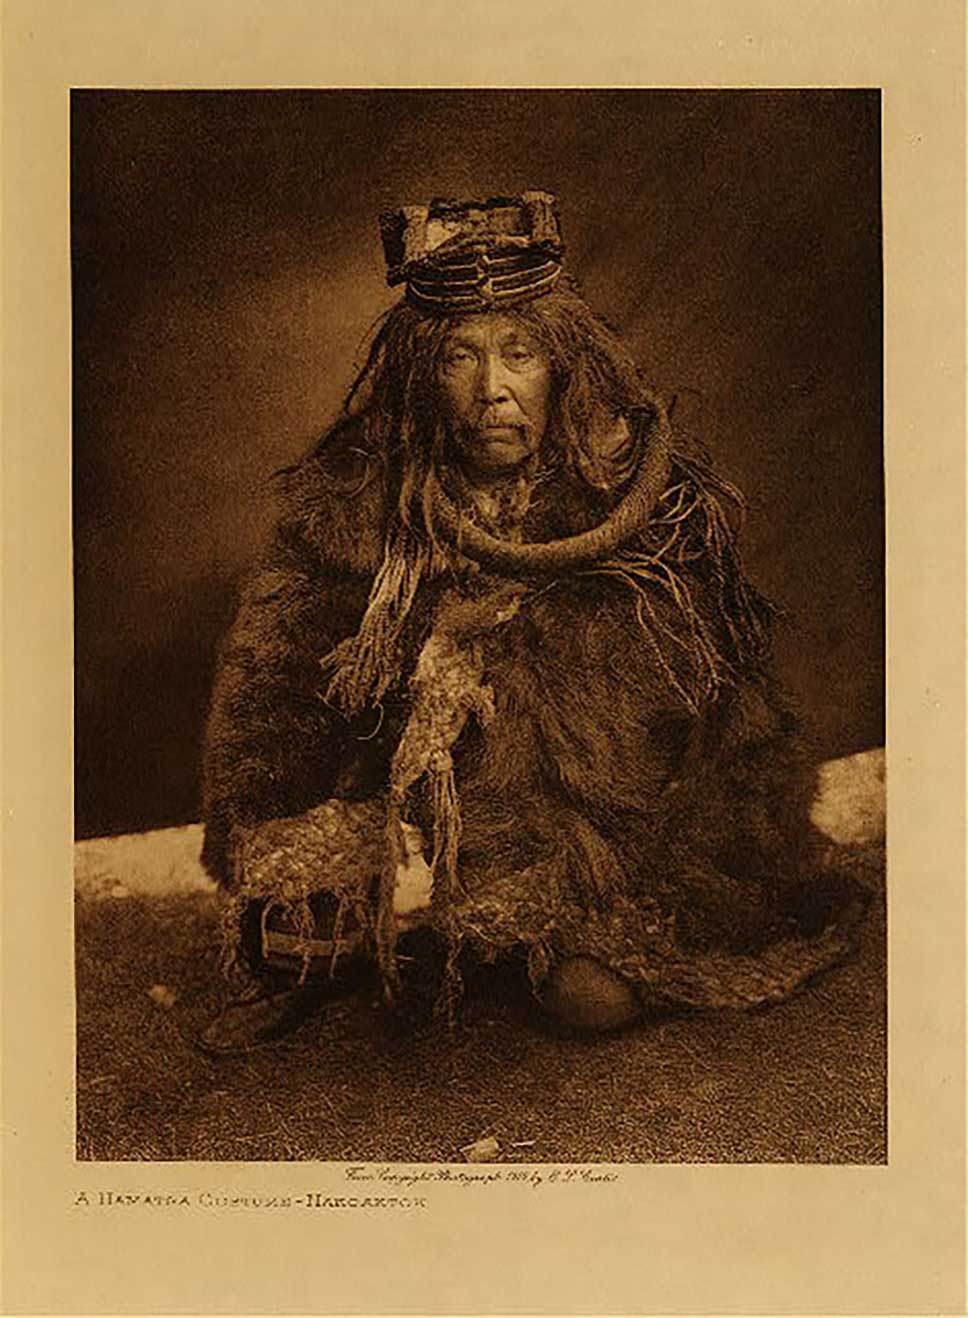 Sepia tone photograph by Edward Curtis of HAMAT´SA DANCER, 1910 in cedar regalia, crouching position, serious expression